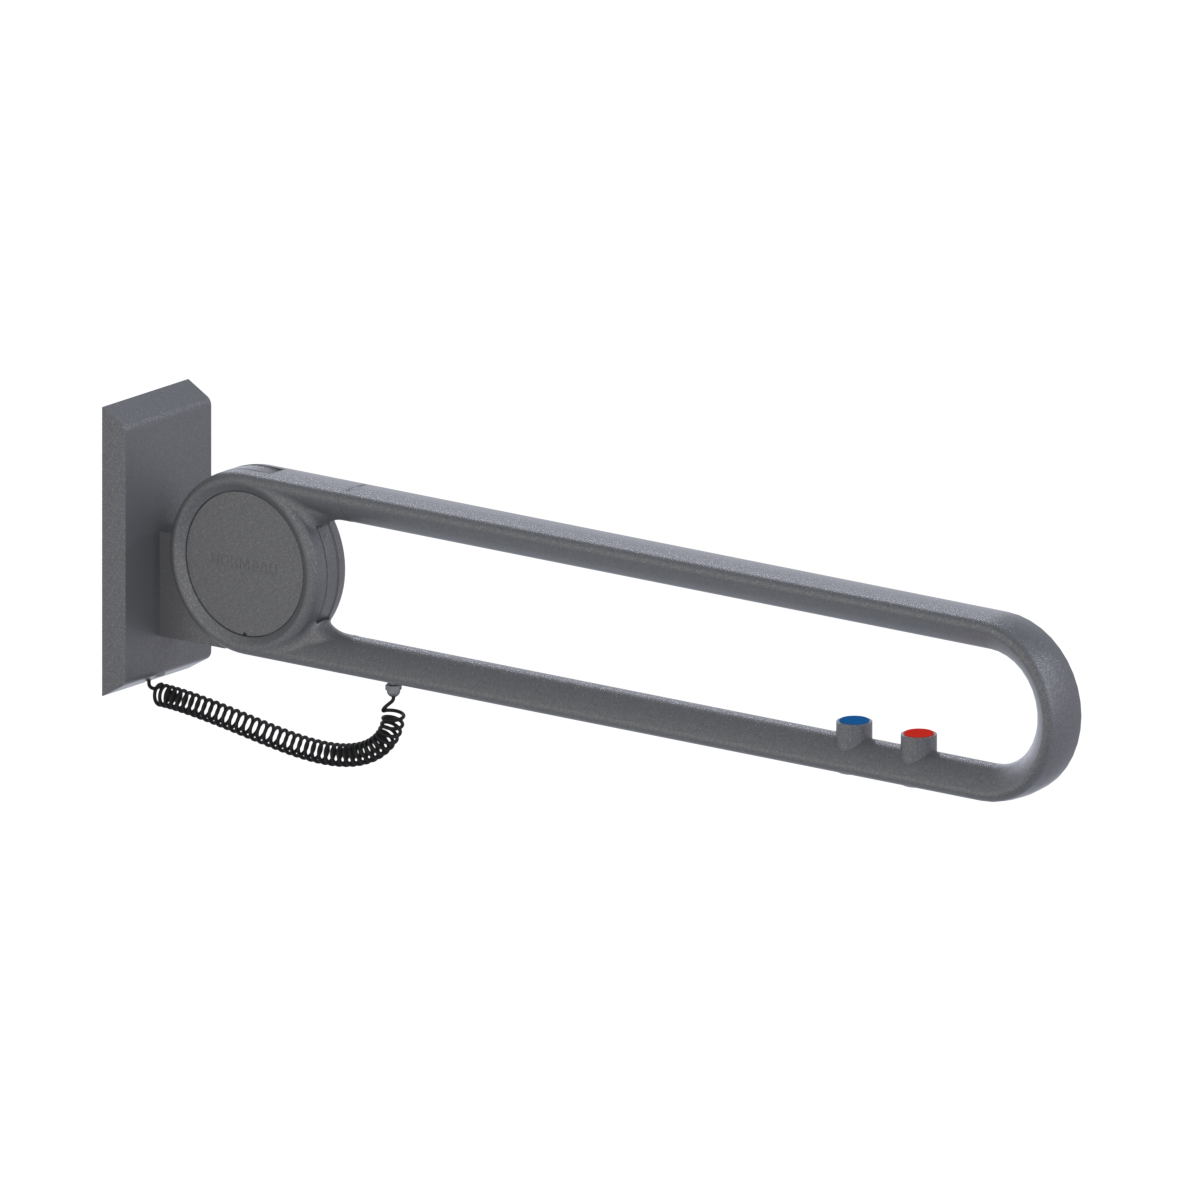 Cavere Care Lift-up support rail vario, with base plate, with 2 E-buttons (WC and call: NOC and NCC), L = 850 mm, connection covered with mounting plate, Cavere Metallic anthracite